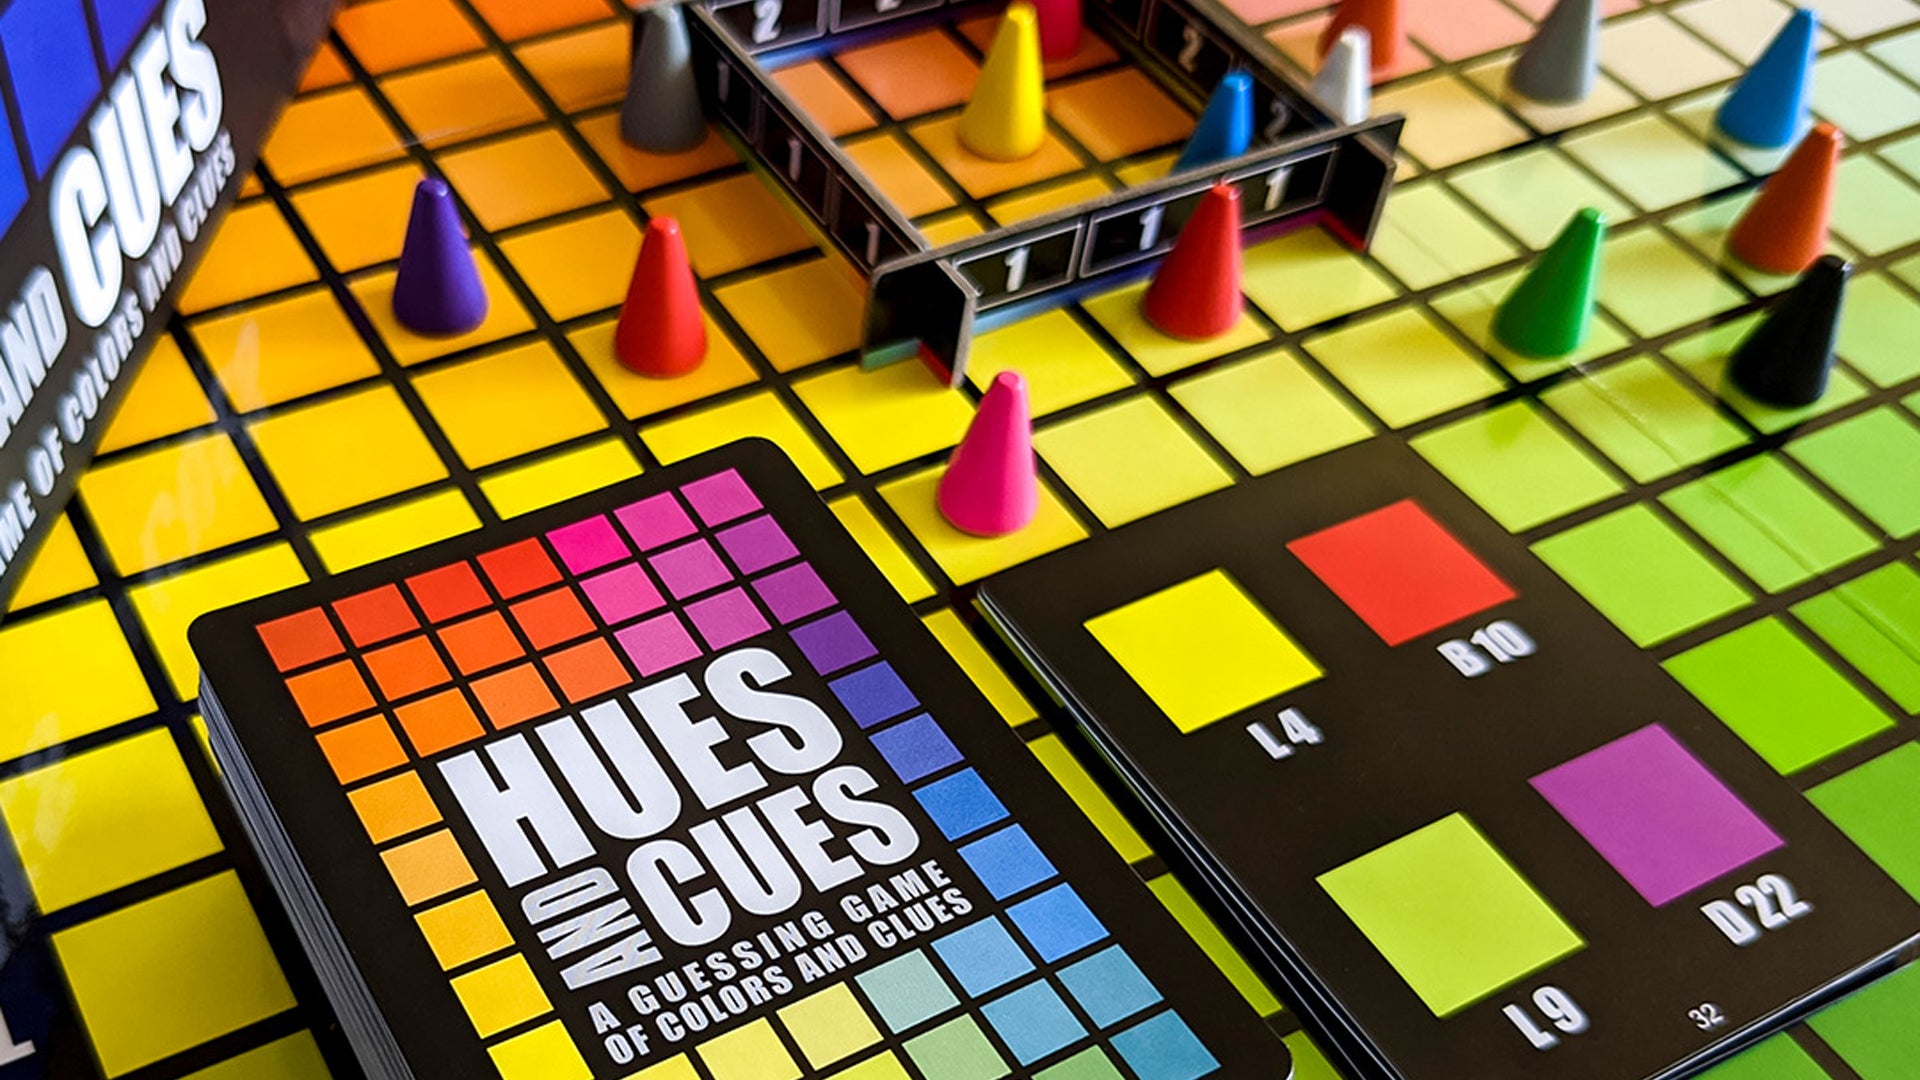 Hues and Cues board game layout 2